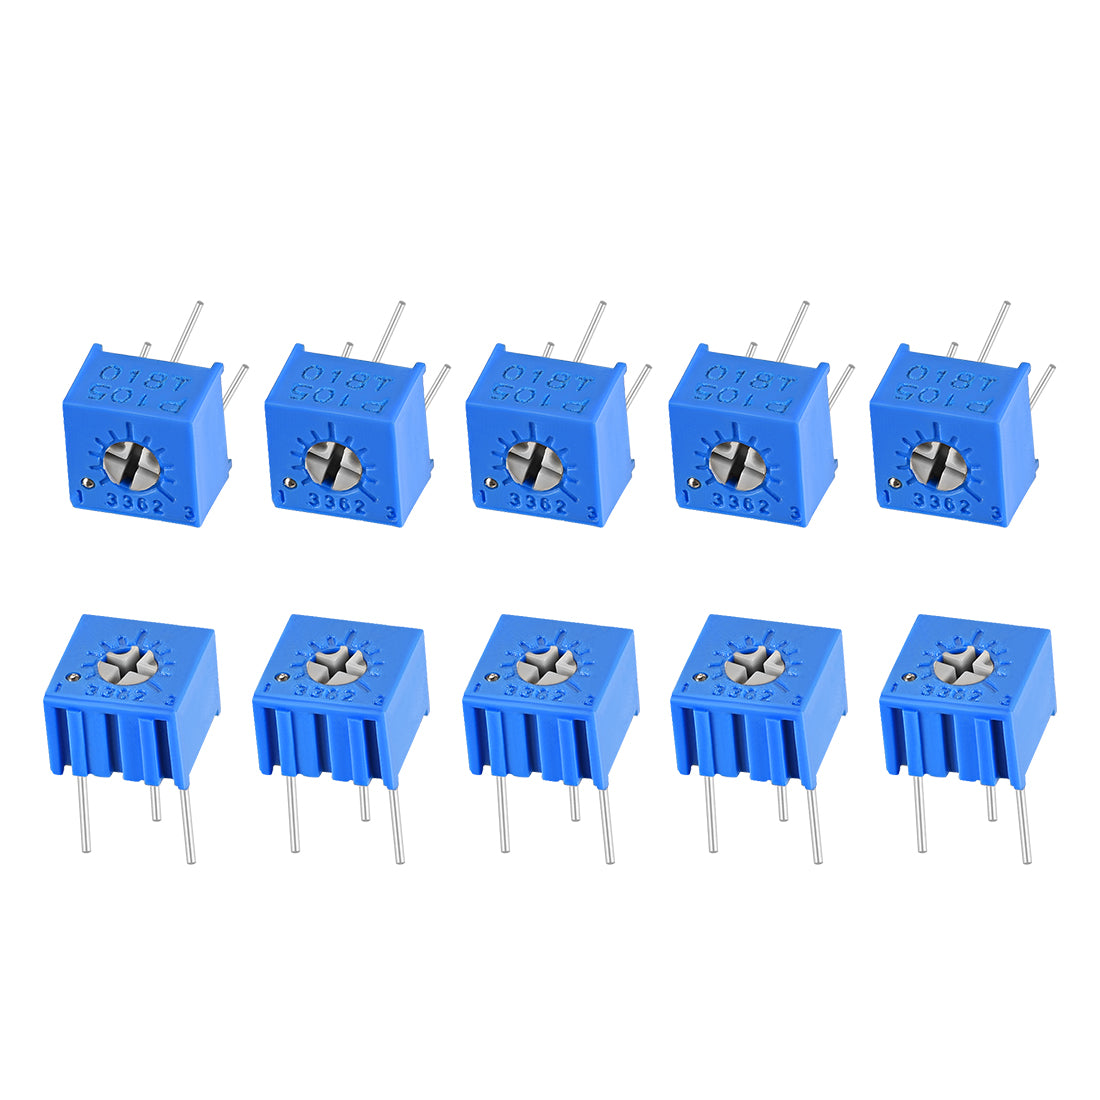 uxcell Uxcell 3362 Trimmer Potentiometer 1M Ohm Top Adjustment Horizontal Variable Resistors 10Pcs